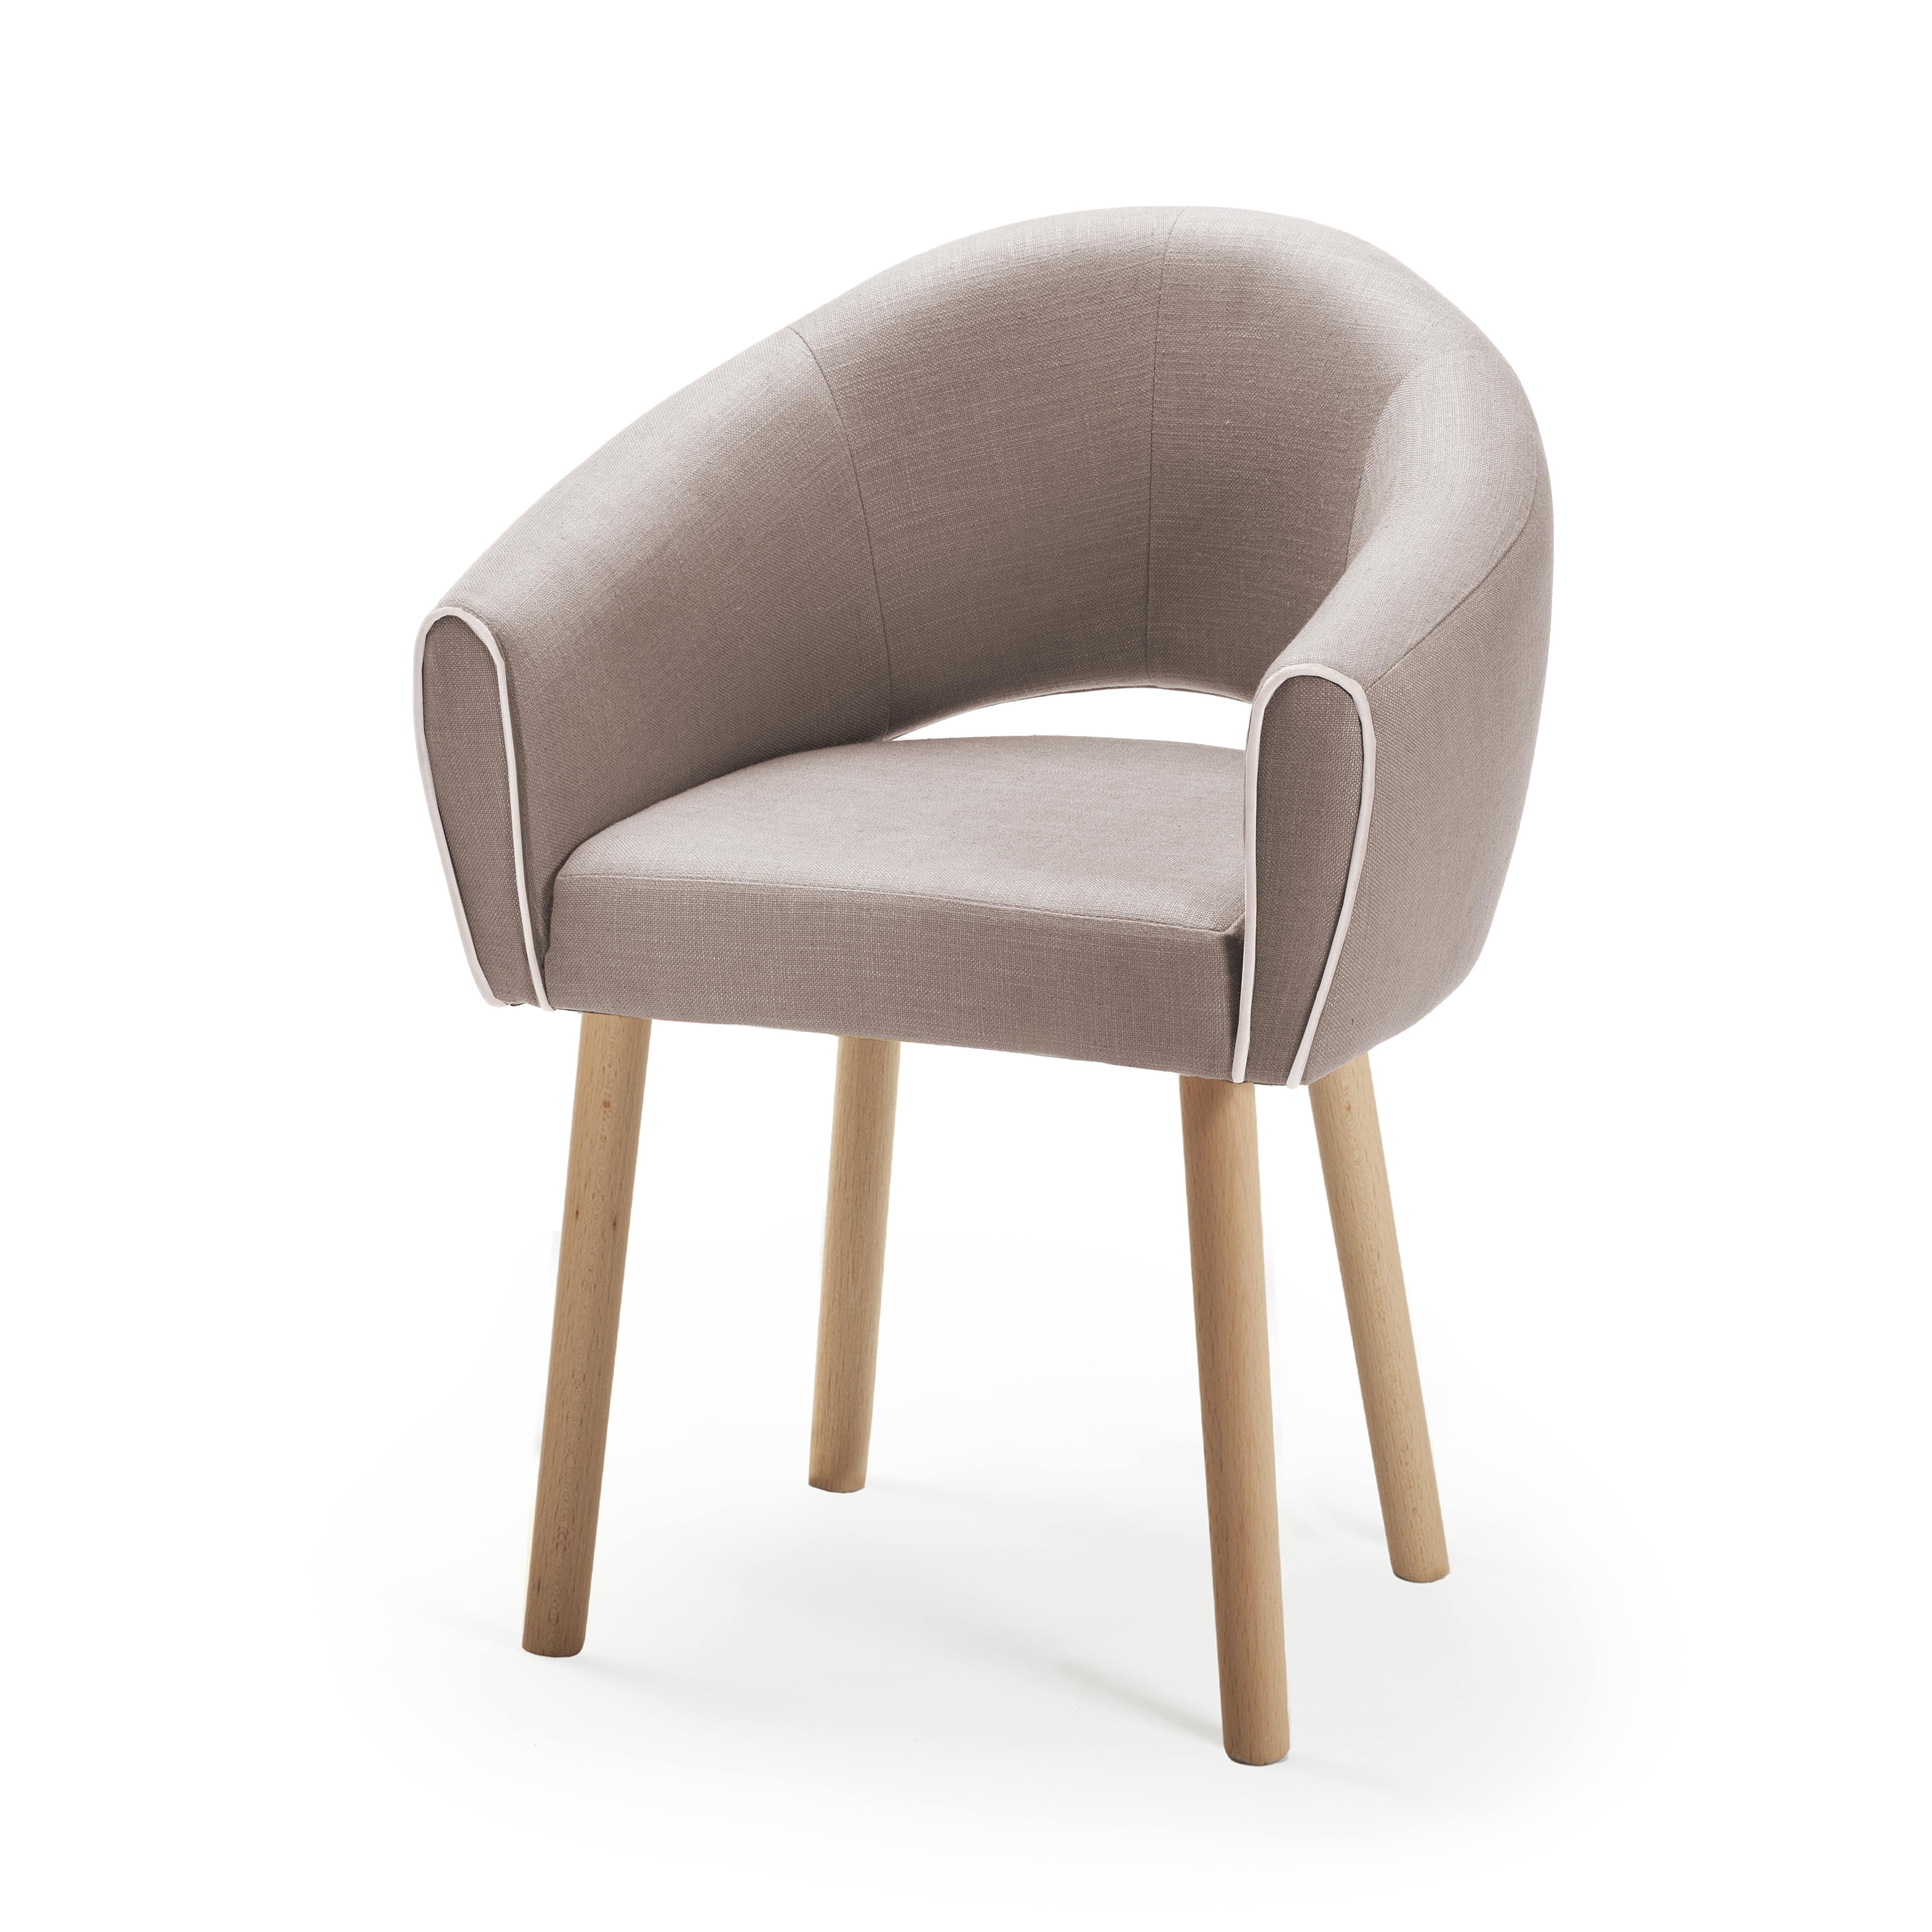 Stylish and elegant, grace chair is extremely comfortable in its perfect finishing’s. With its smooth edges, Grace has definitely a familiar retro feeling. A perfect combination of highly comfortable and perfectly tailored upholstery with the